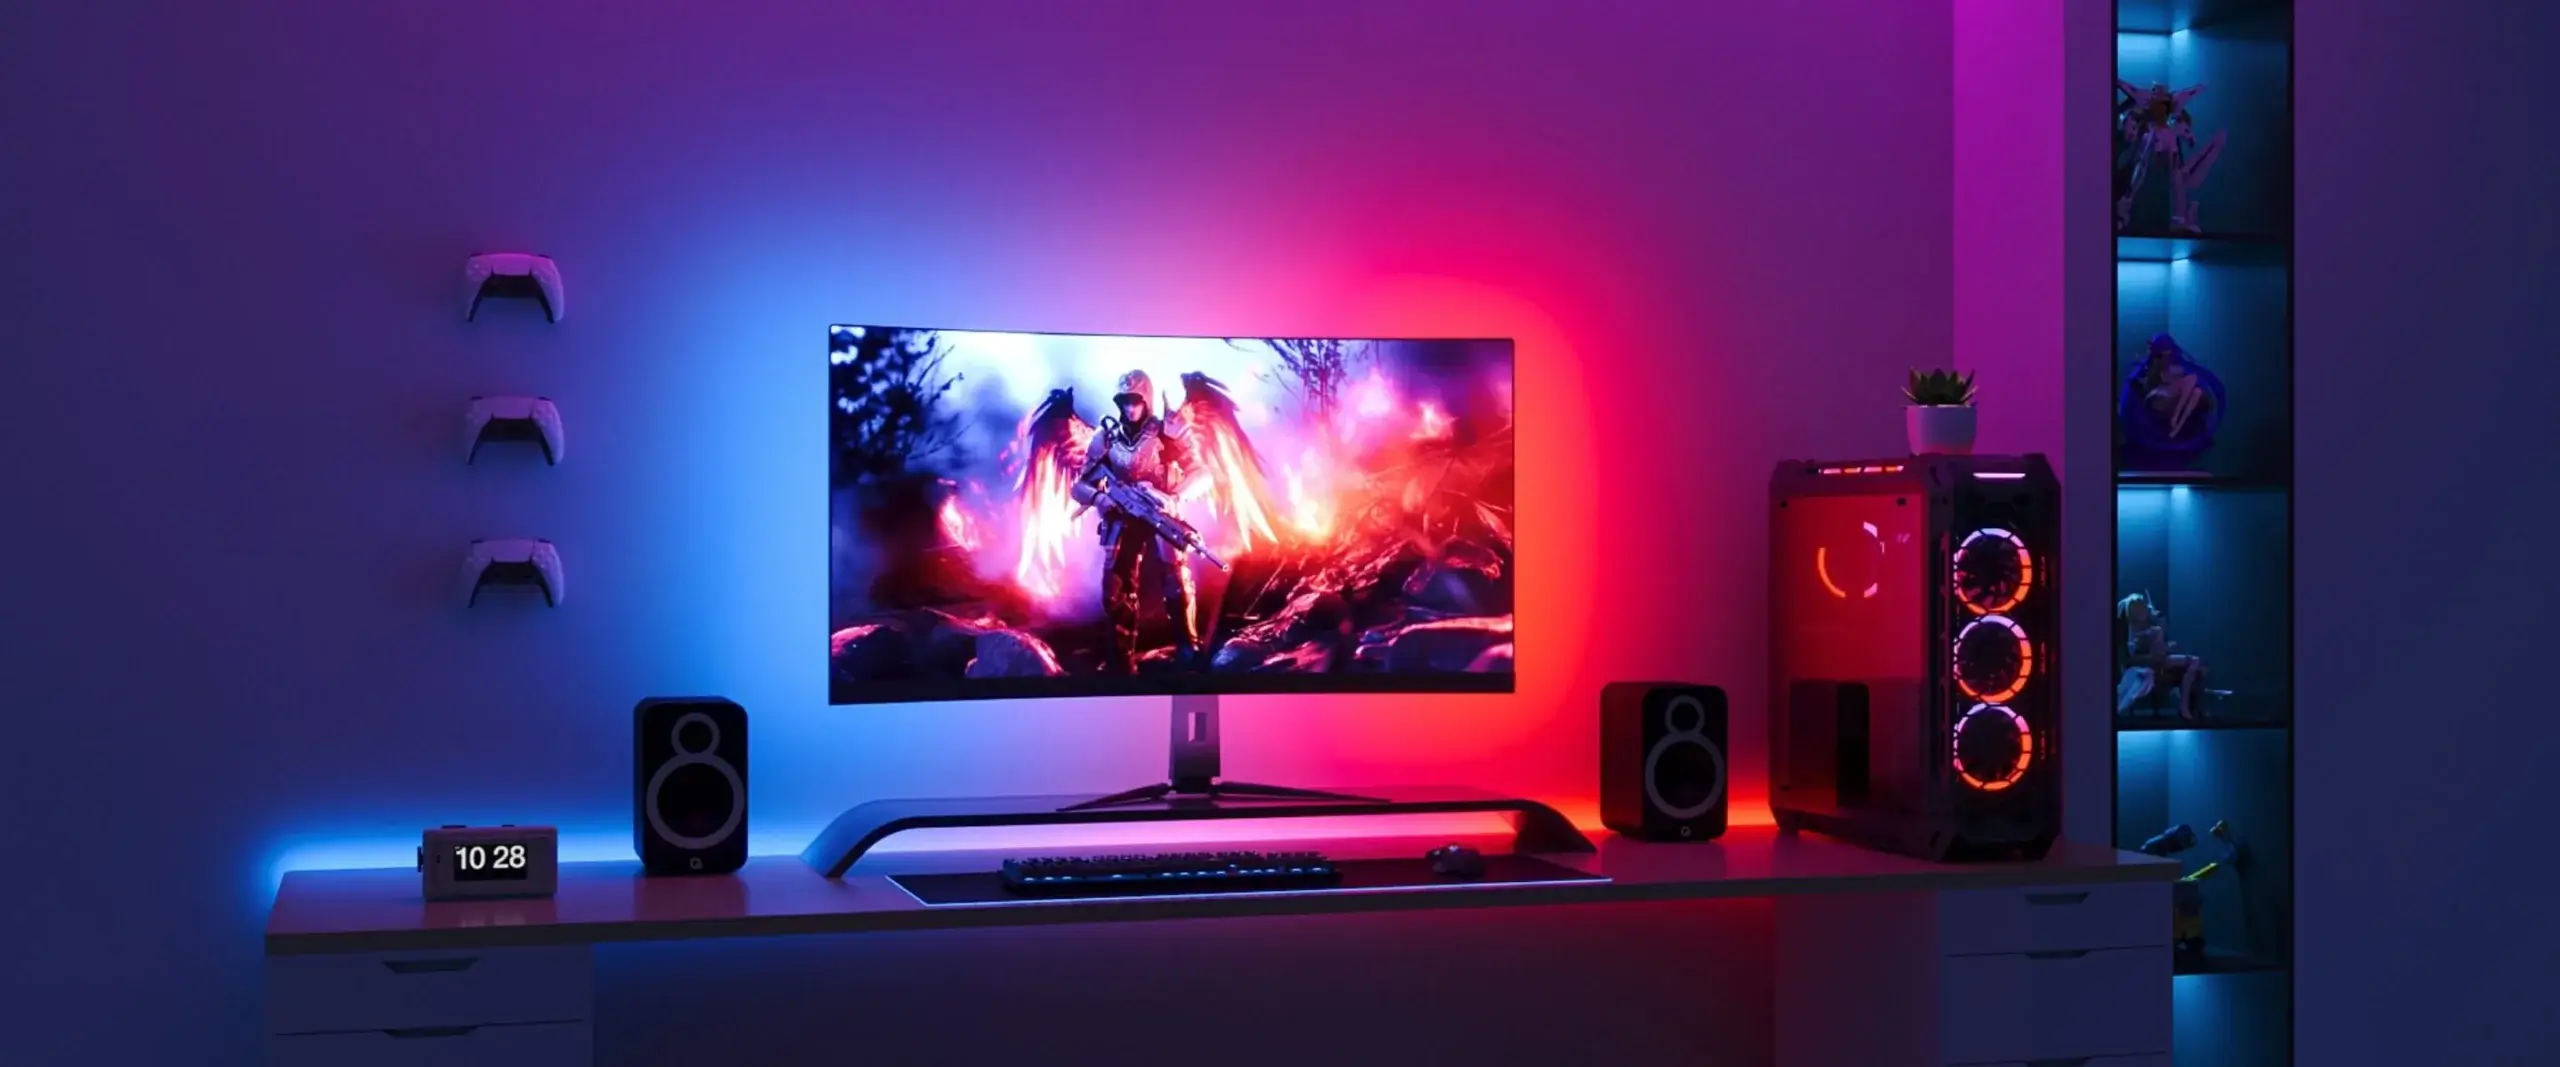 https://www.smartlights.de/wp-content/uploads/Govee-Gaming-LED-Strip-G1-am-Computermonitor-scaled.webp